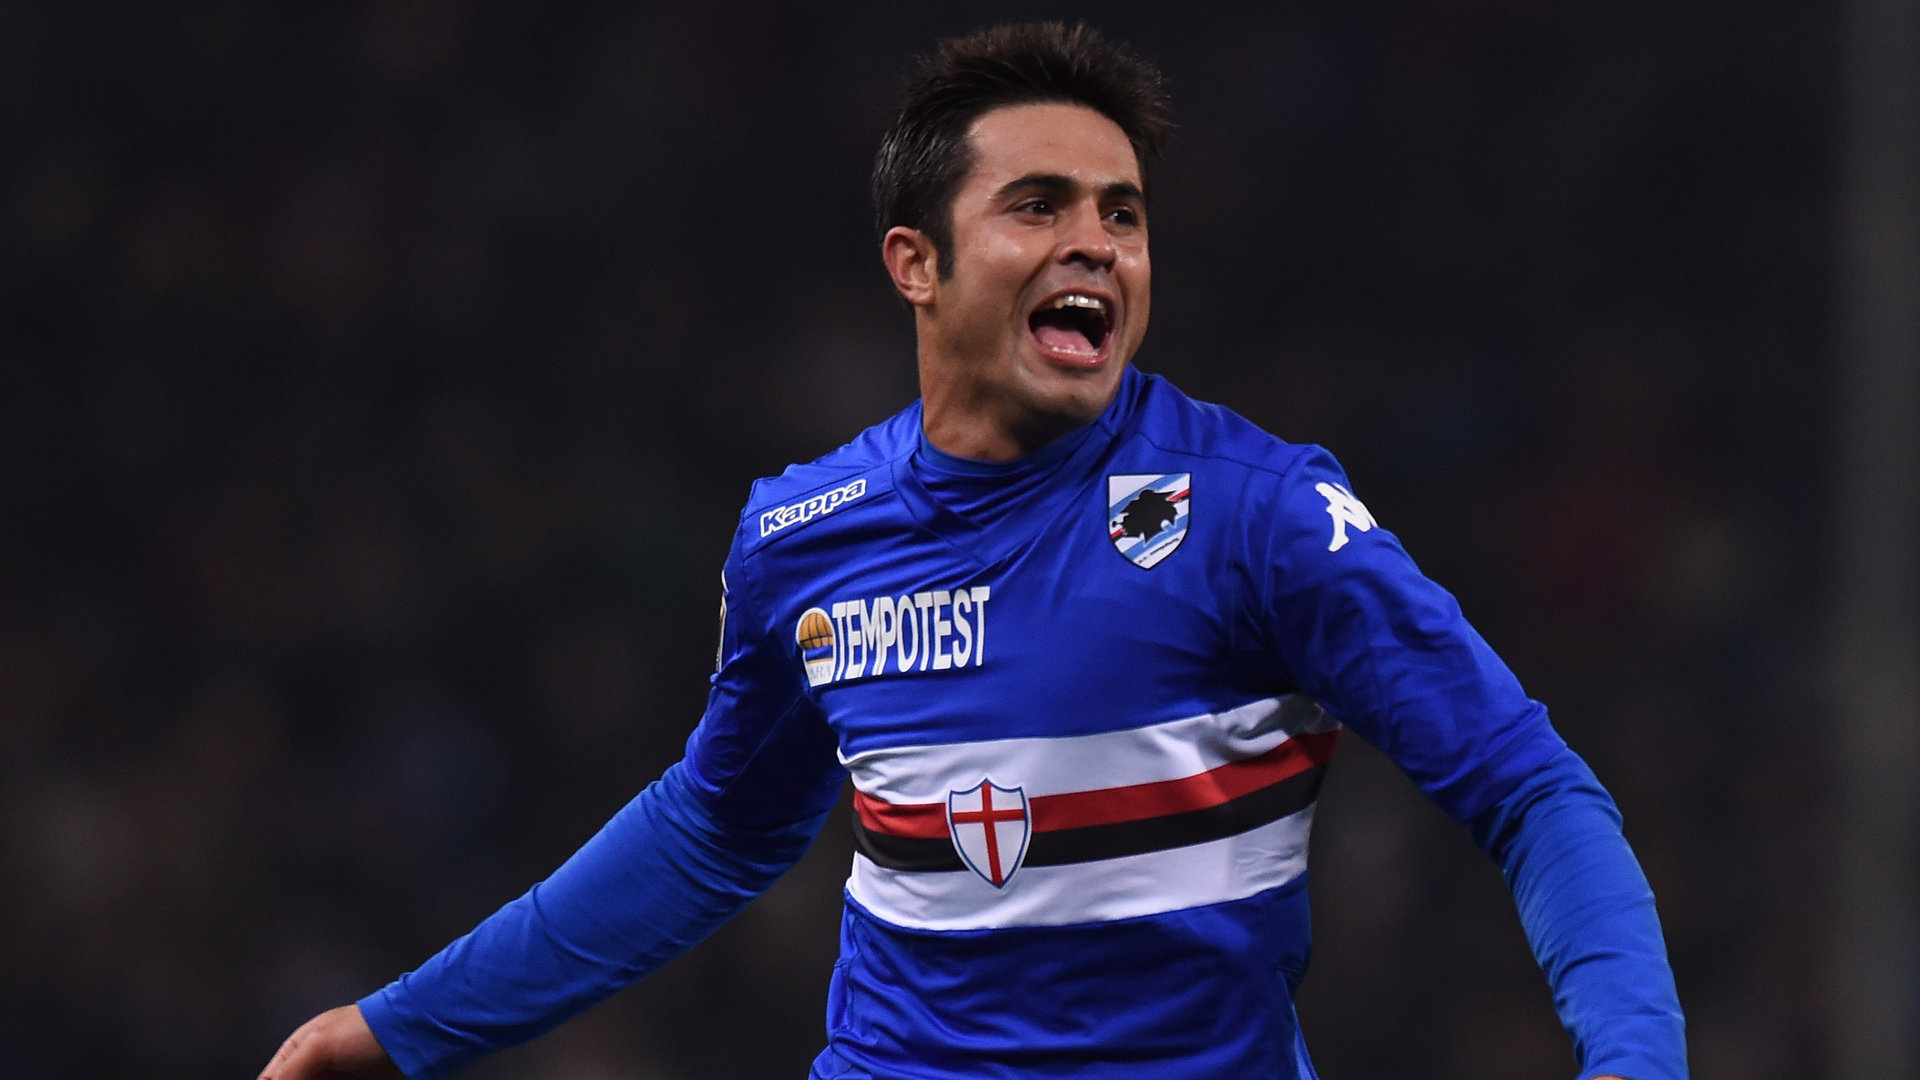 Eder is one of the clubs star players